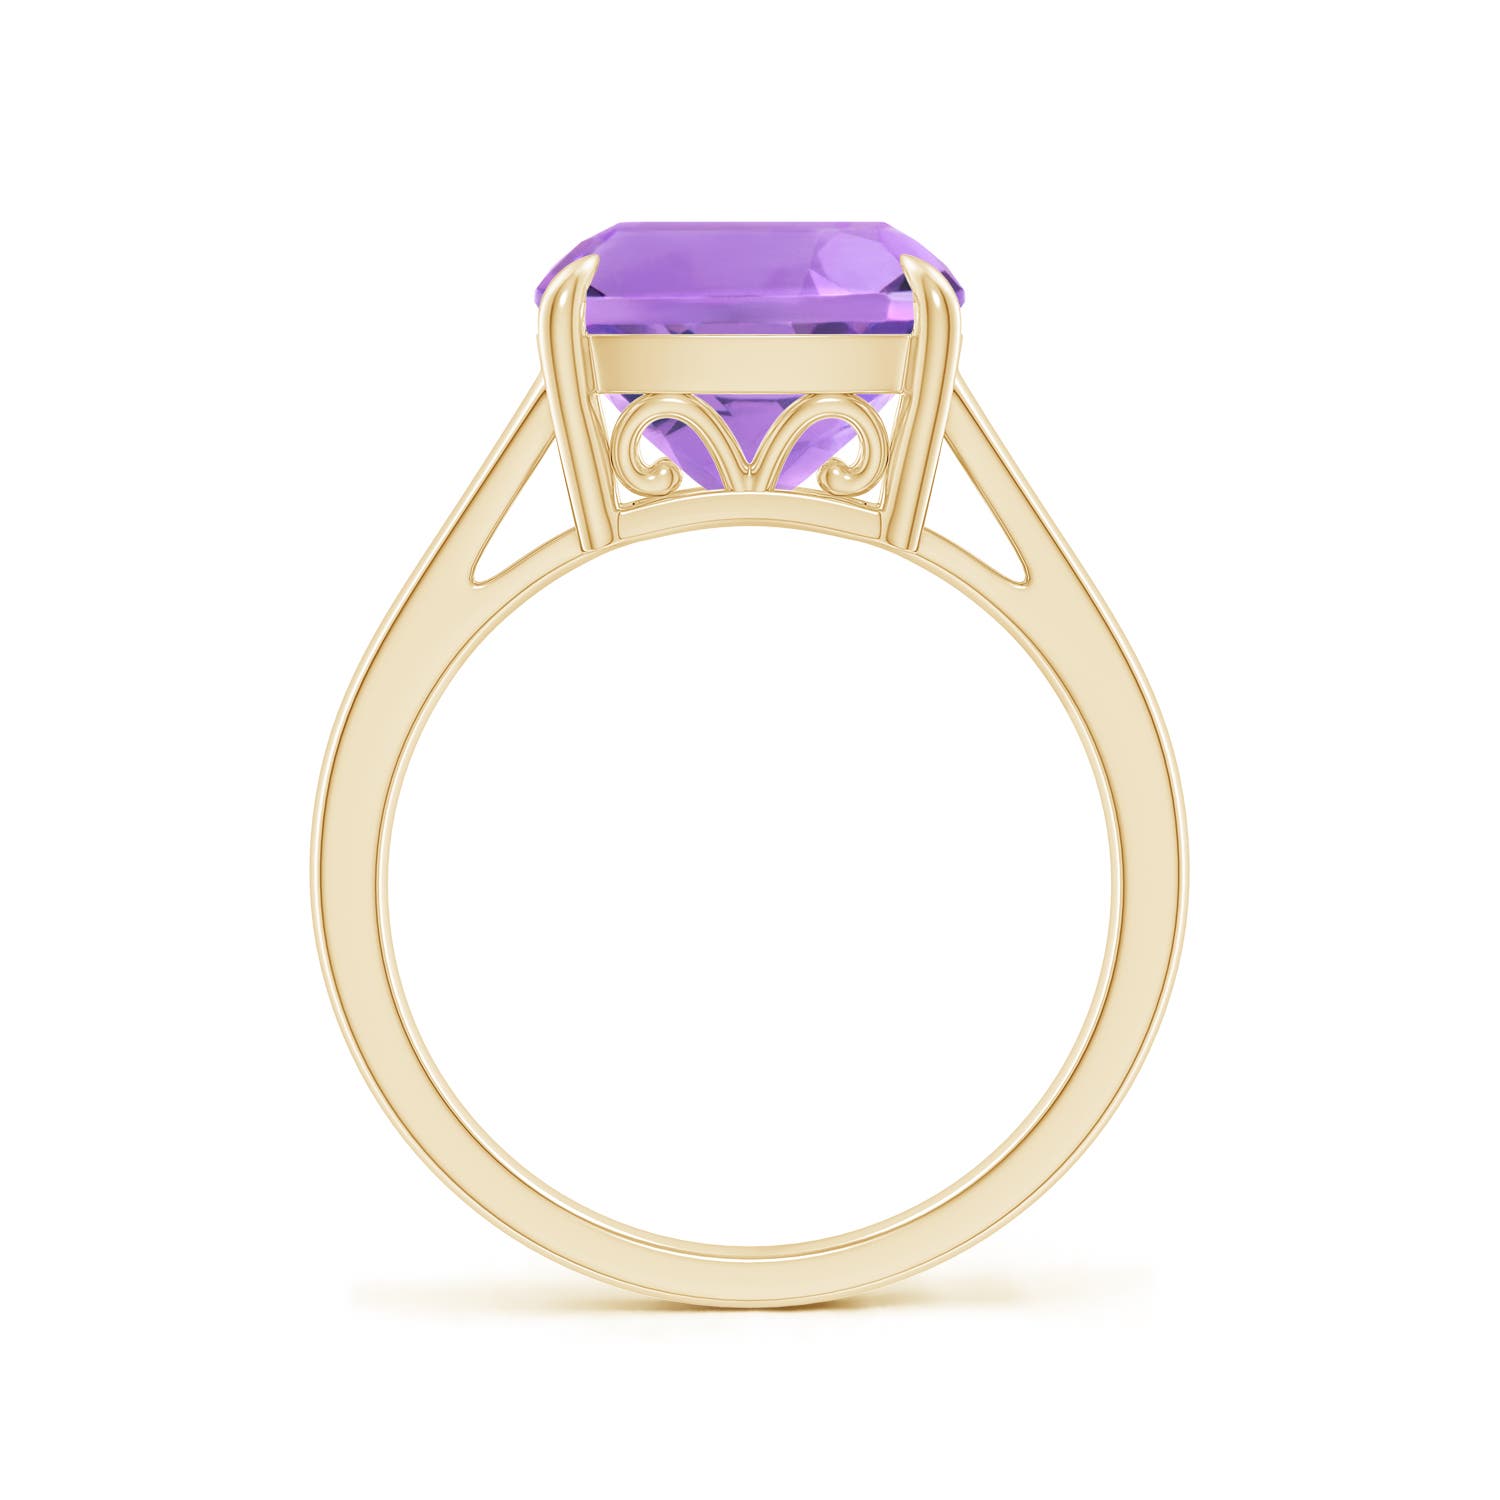 A - Amethyst / 3.65 CT / 14 KT Yellow Gold